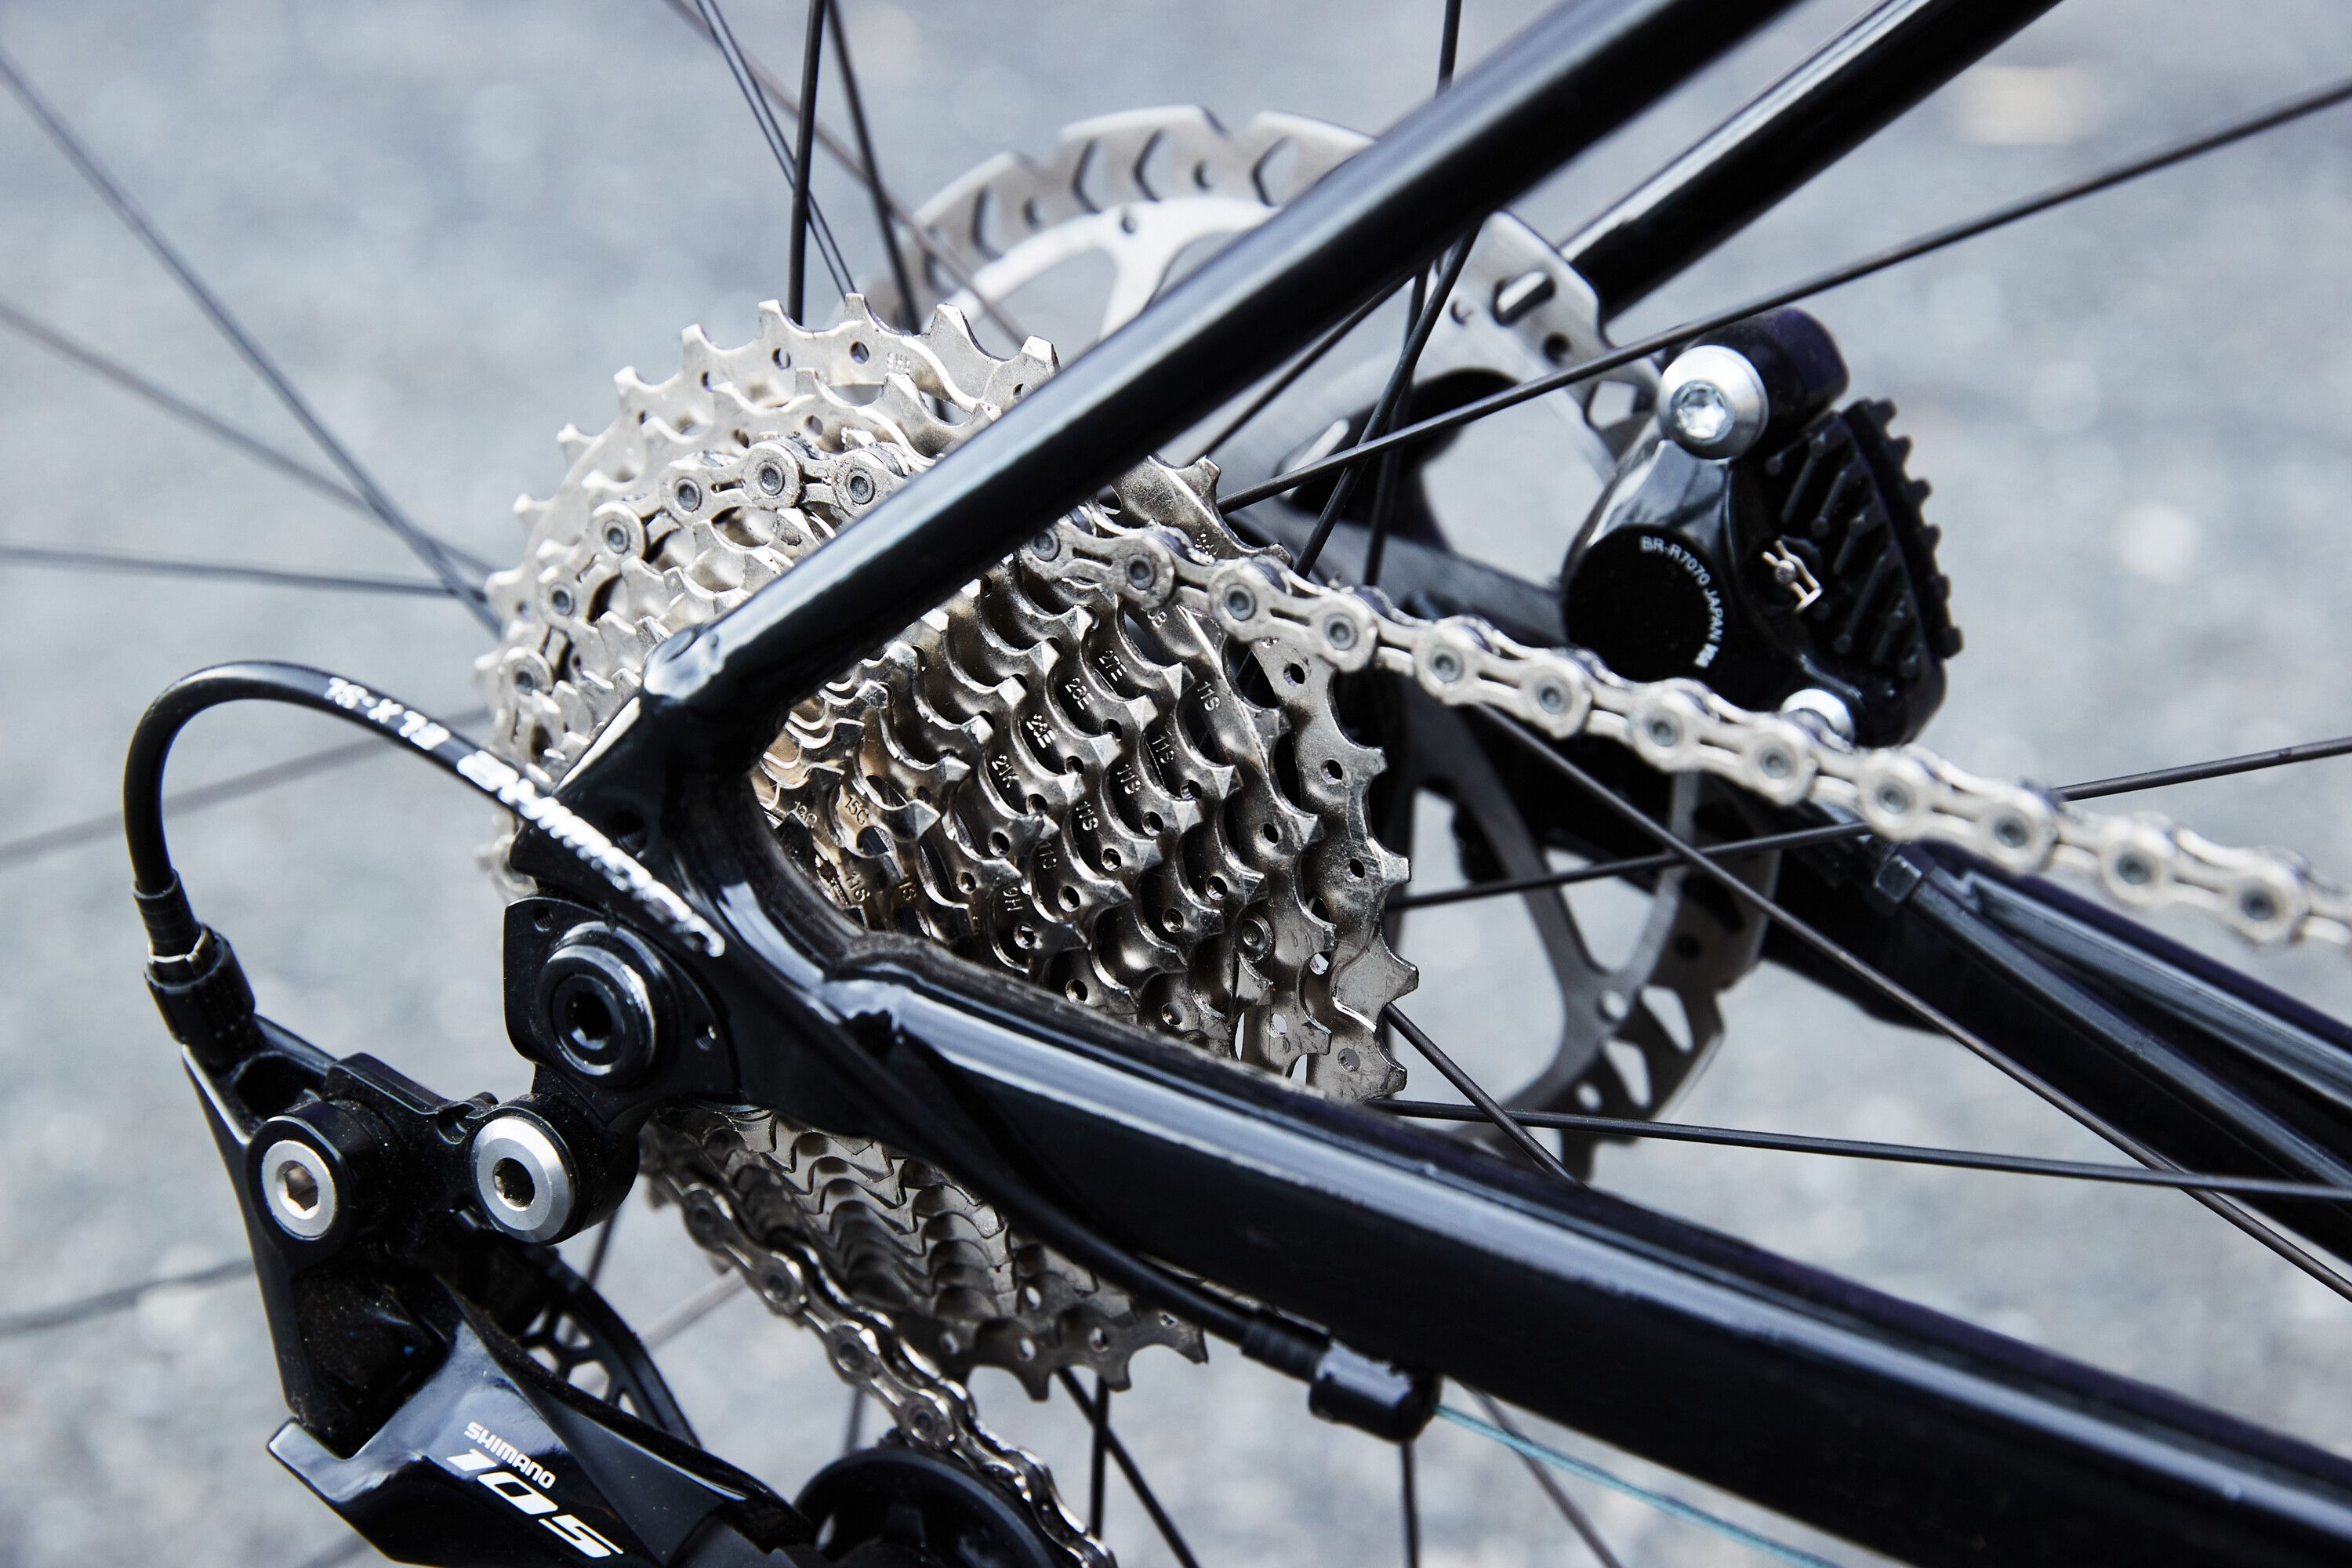 How Do Gears on a Mountain Bike Work? The different types of chainrings and cassettes